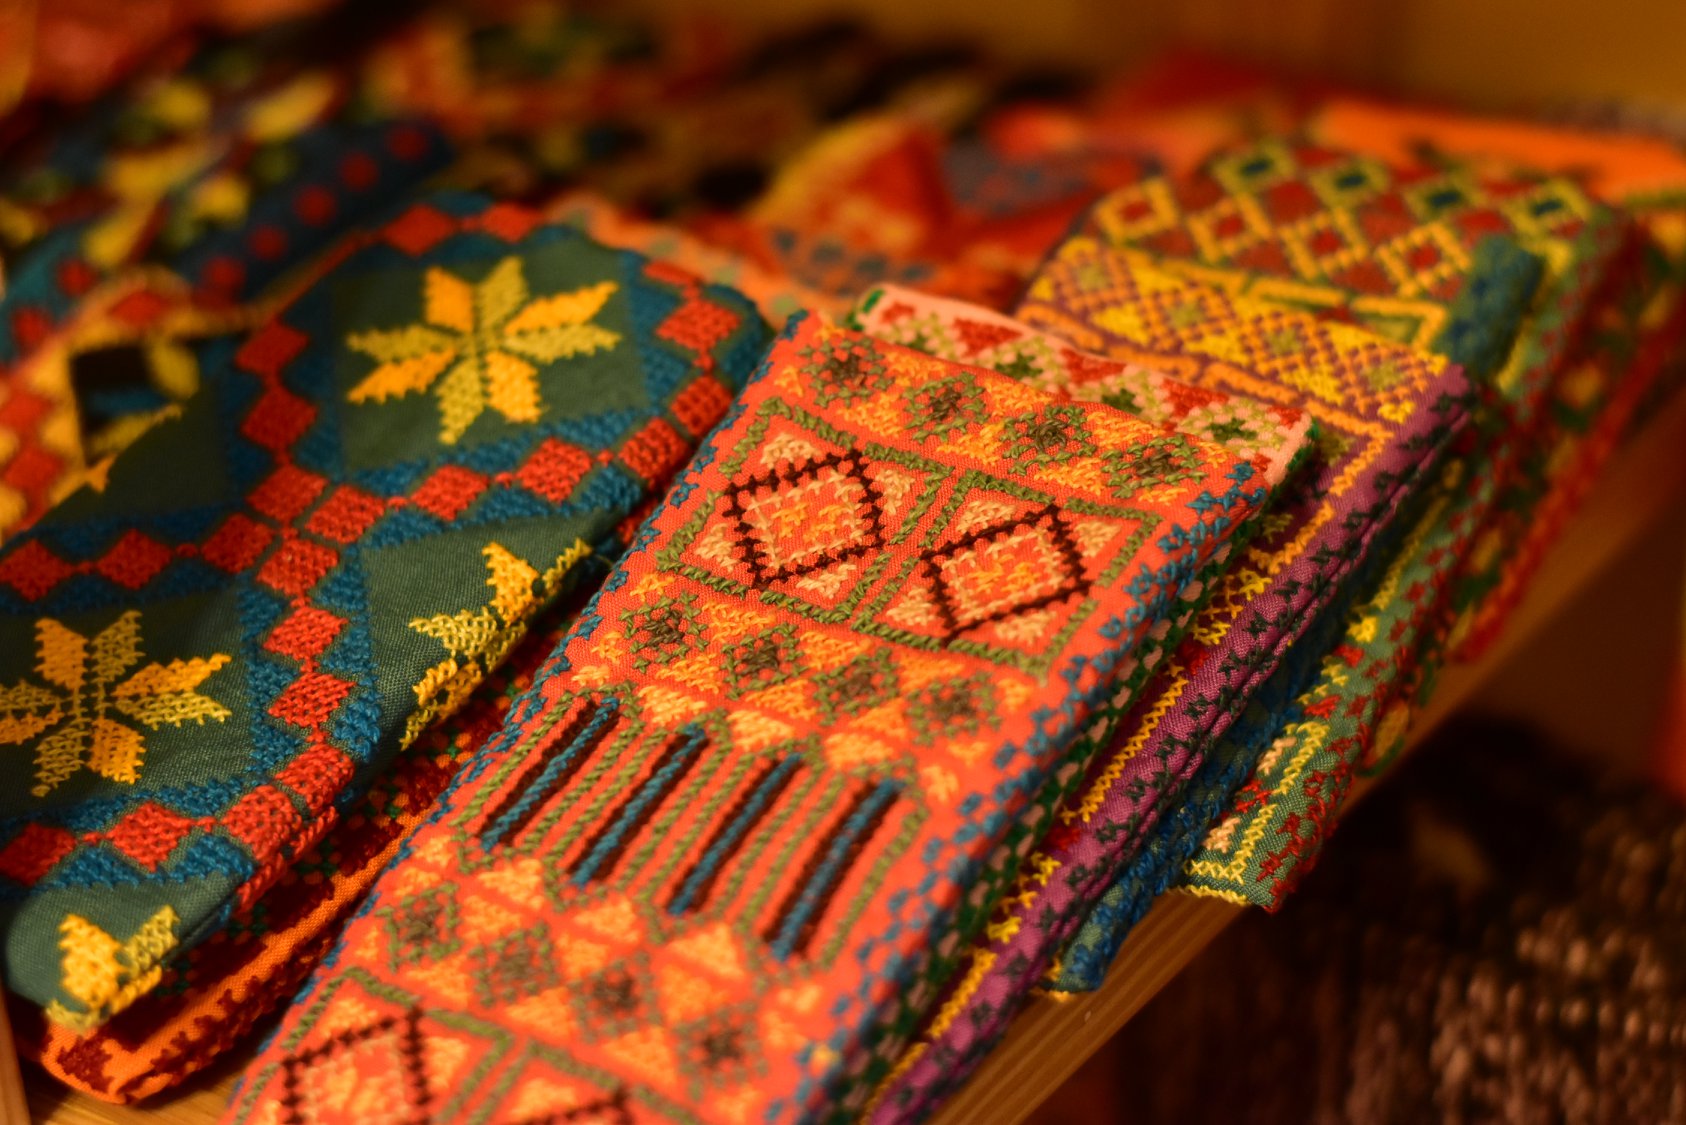 Egyptian Handicrafts from Fair Trade Egypt's official Facebook page